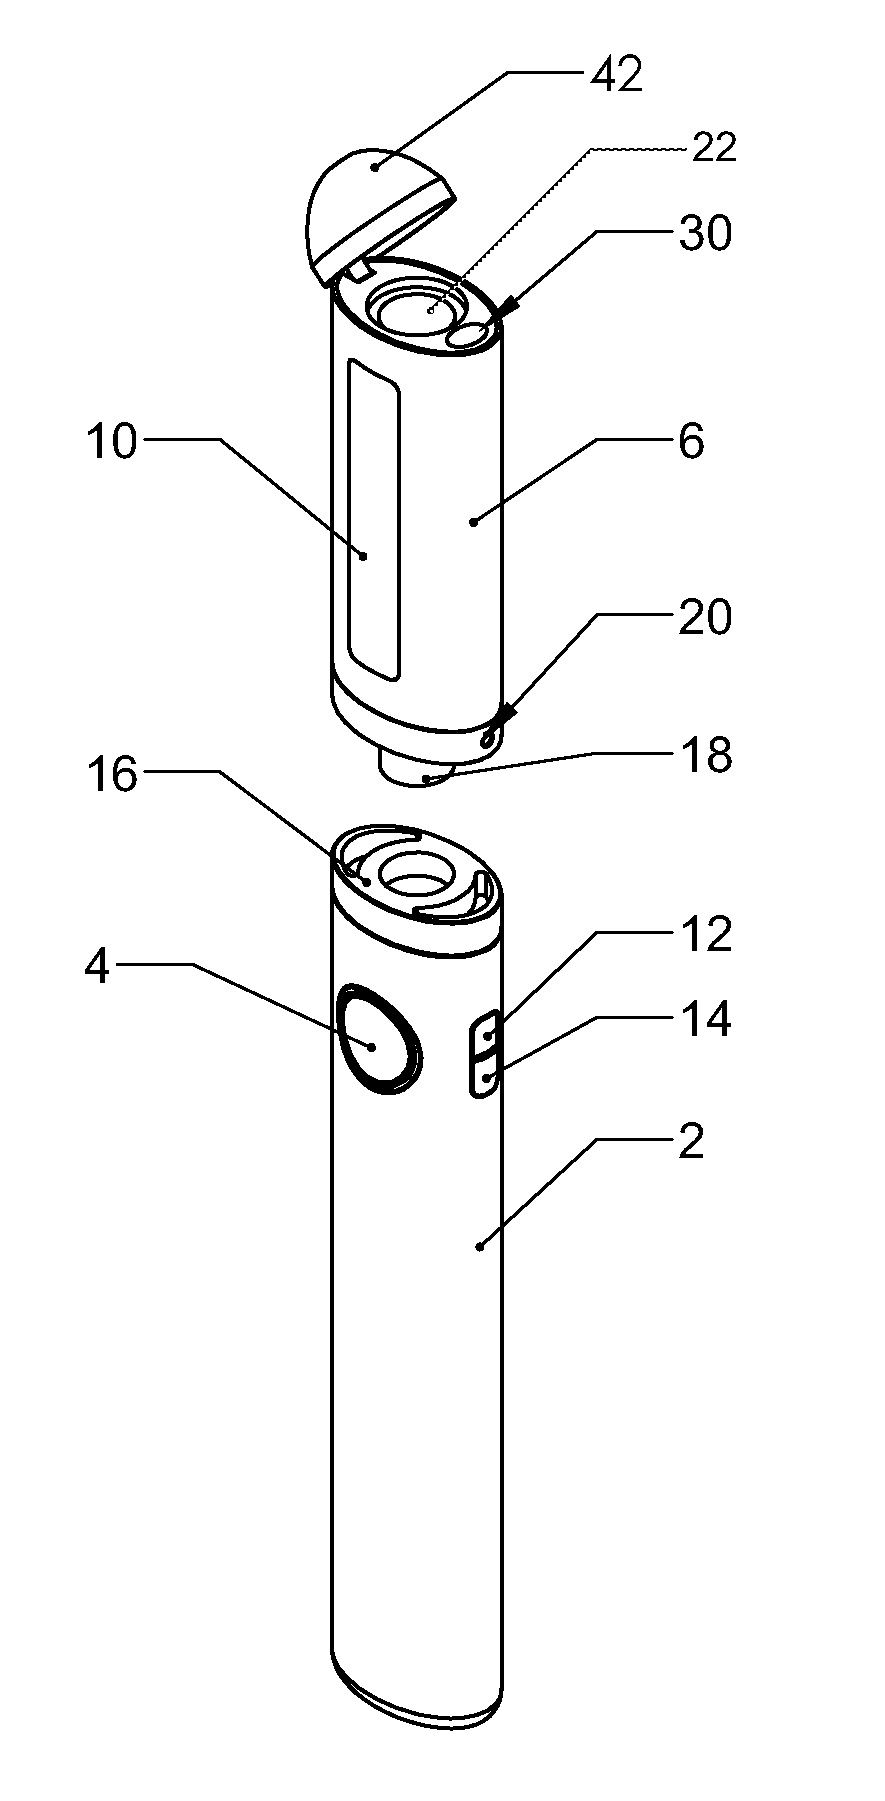 Vaporizer With Multiple-Chamber Heating